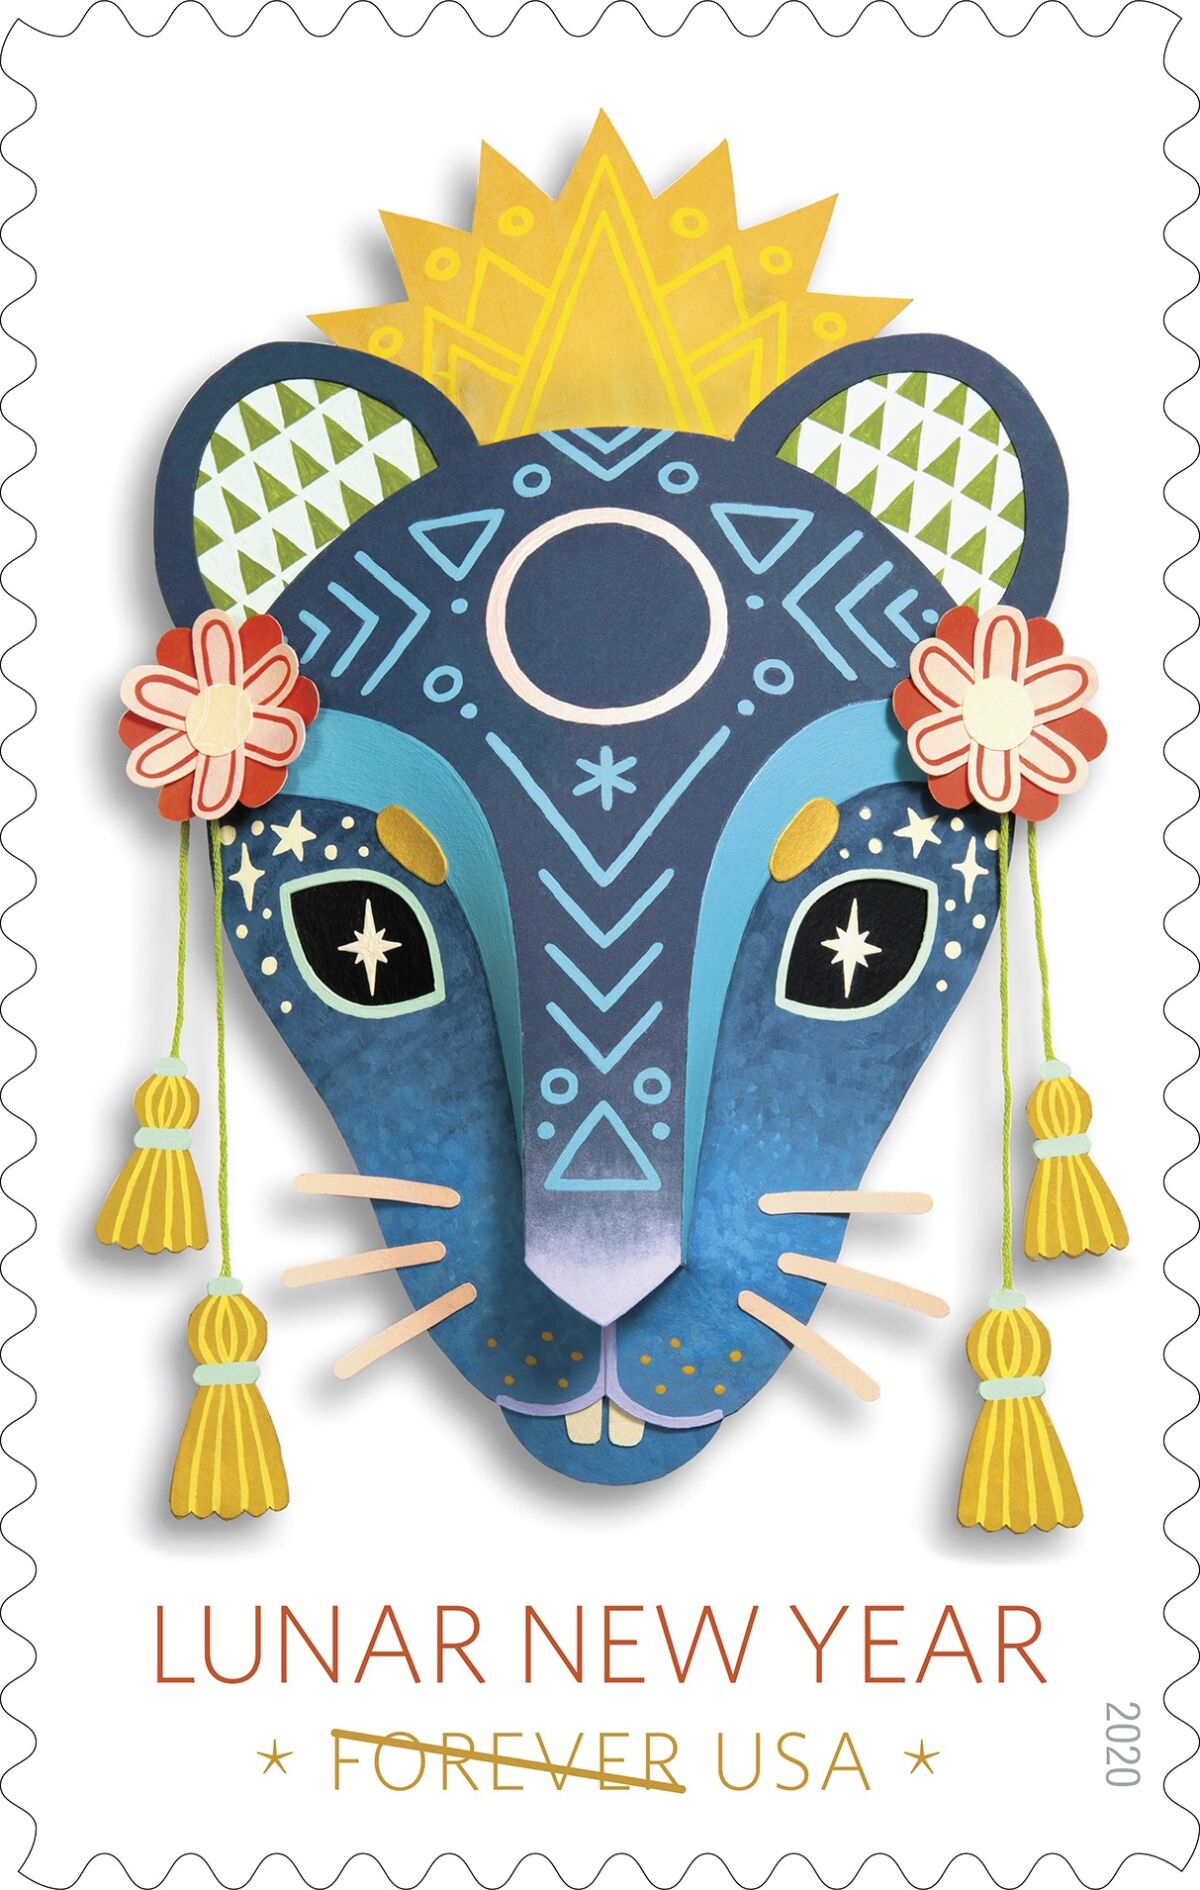 USPS Year of the Rat stamp